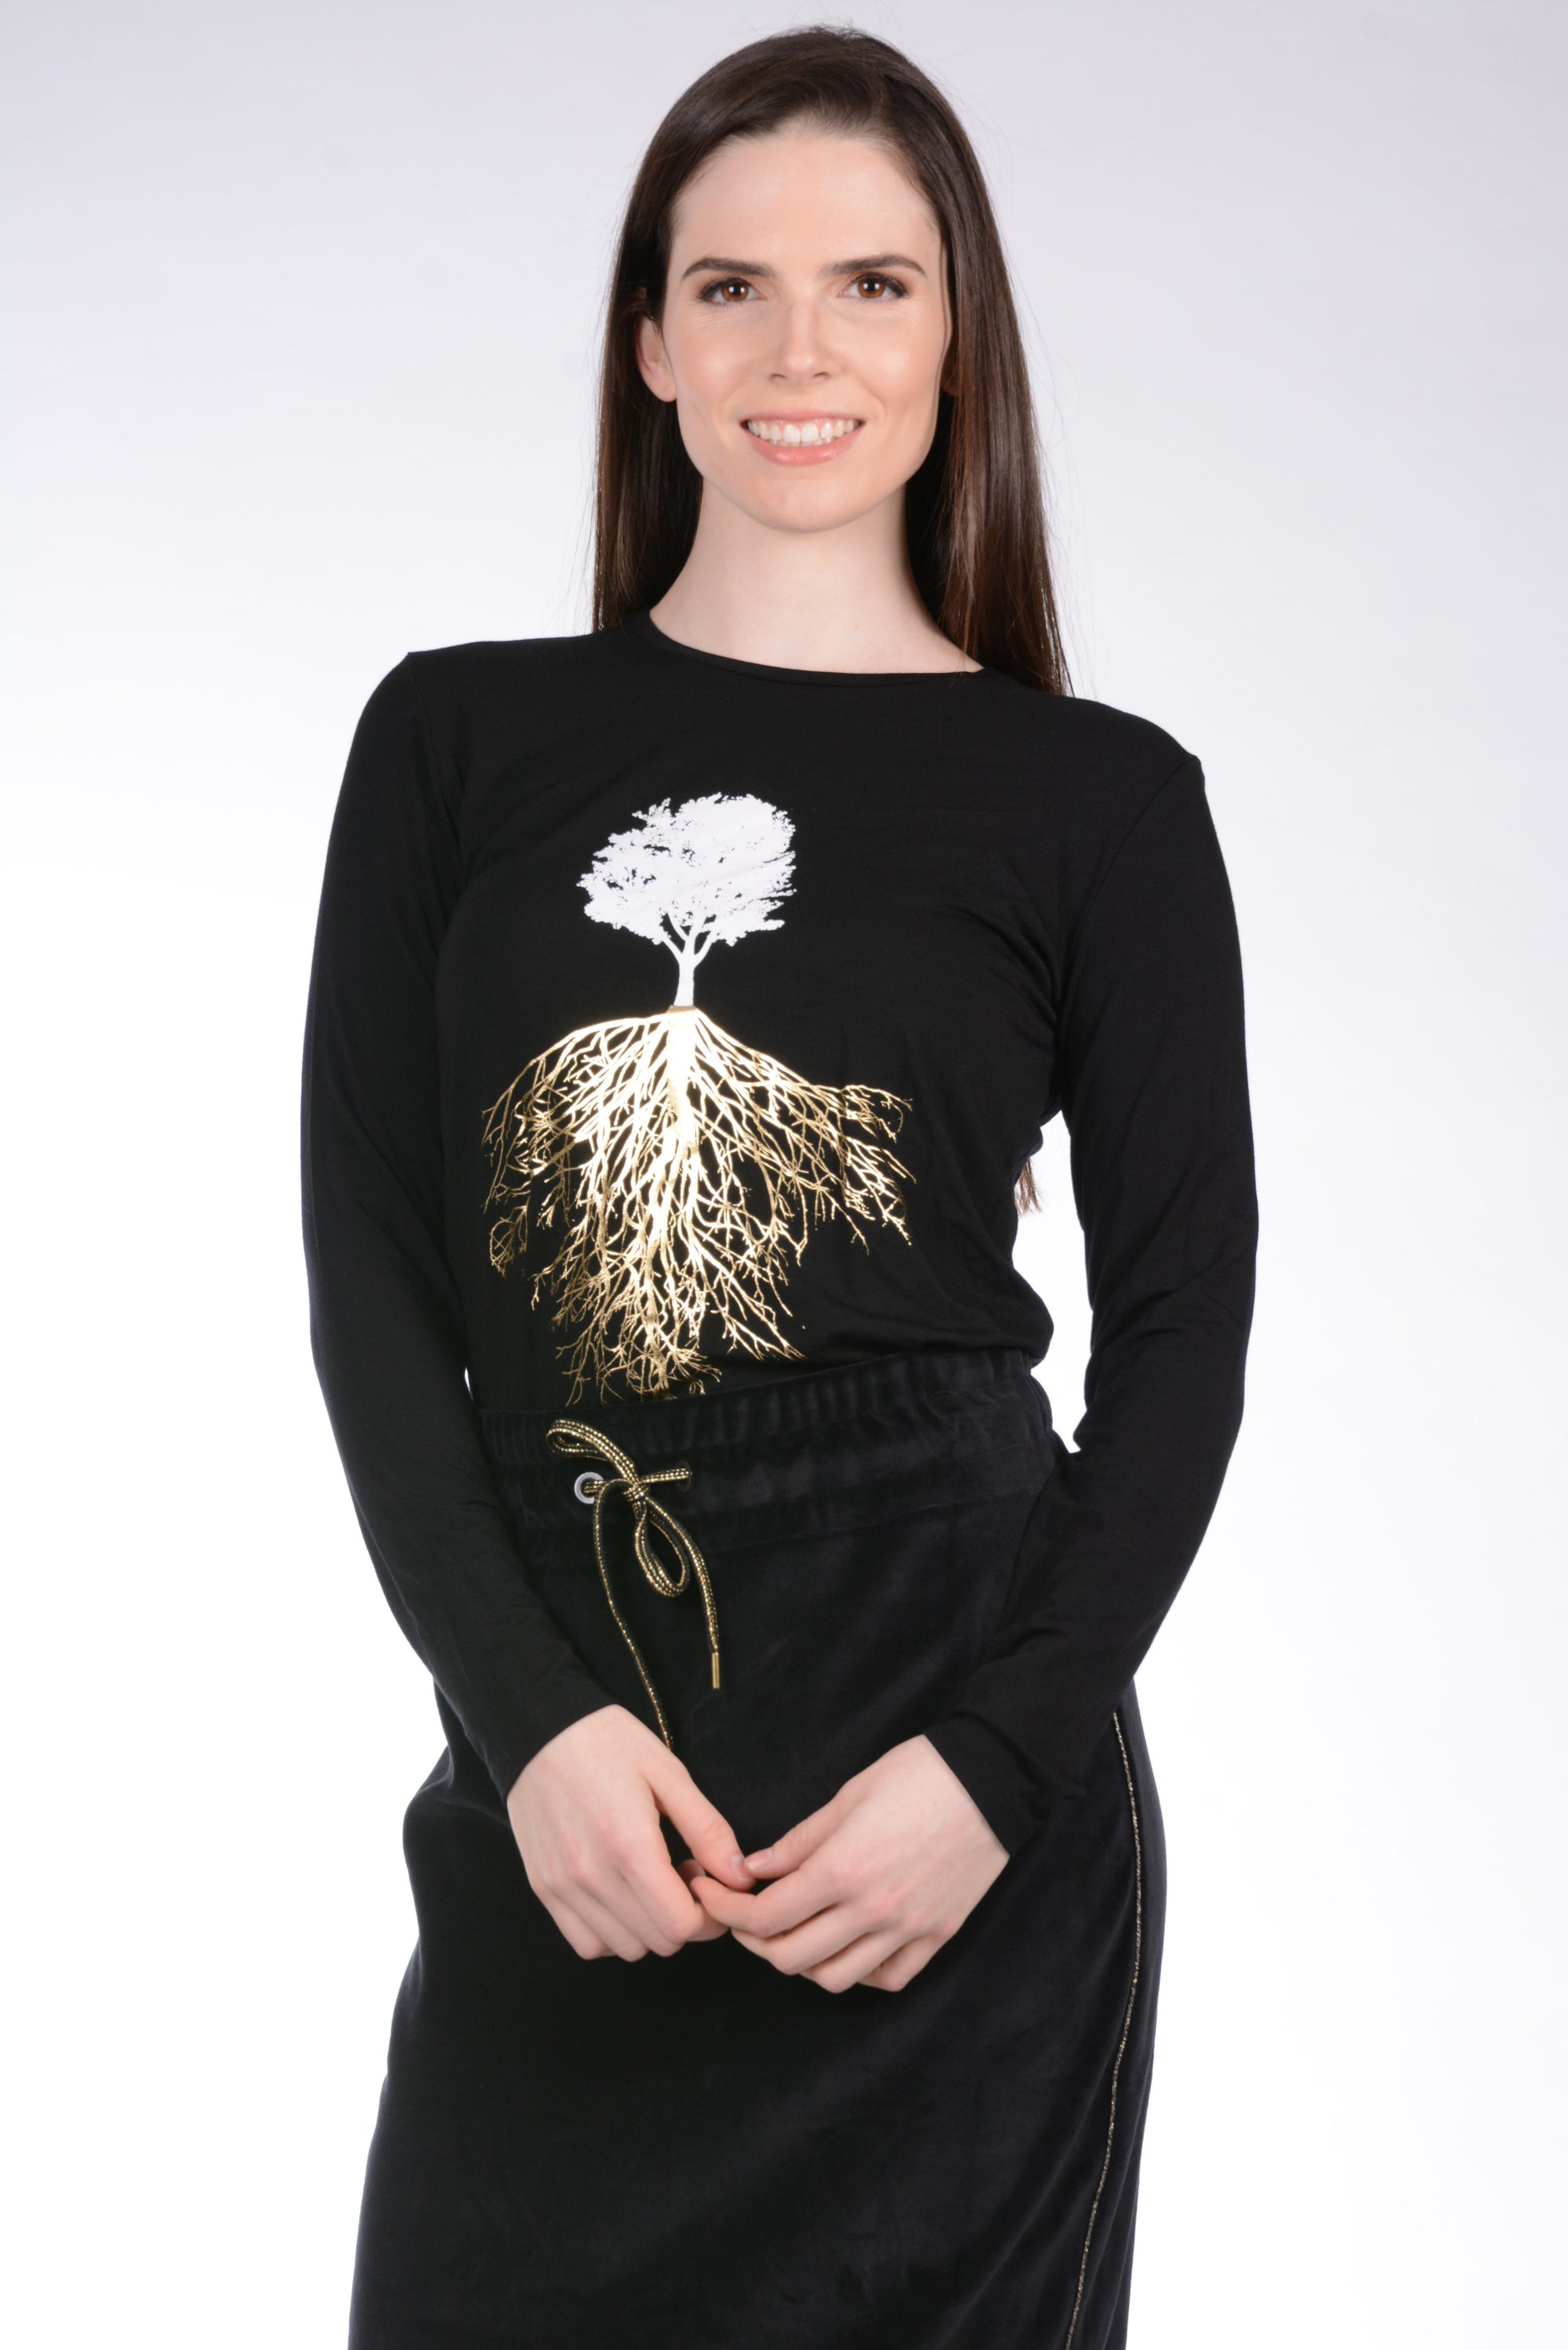 Tree T-Shirt in Black and Gold Foil Long Sleeves